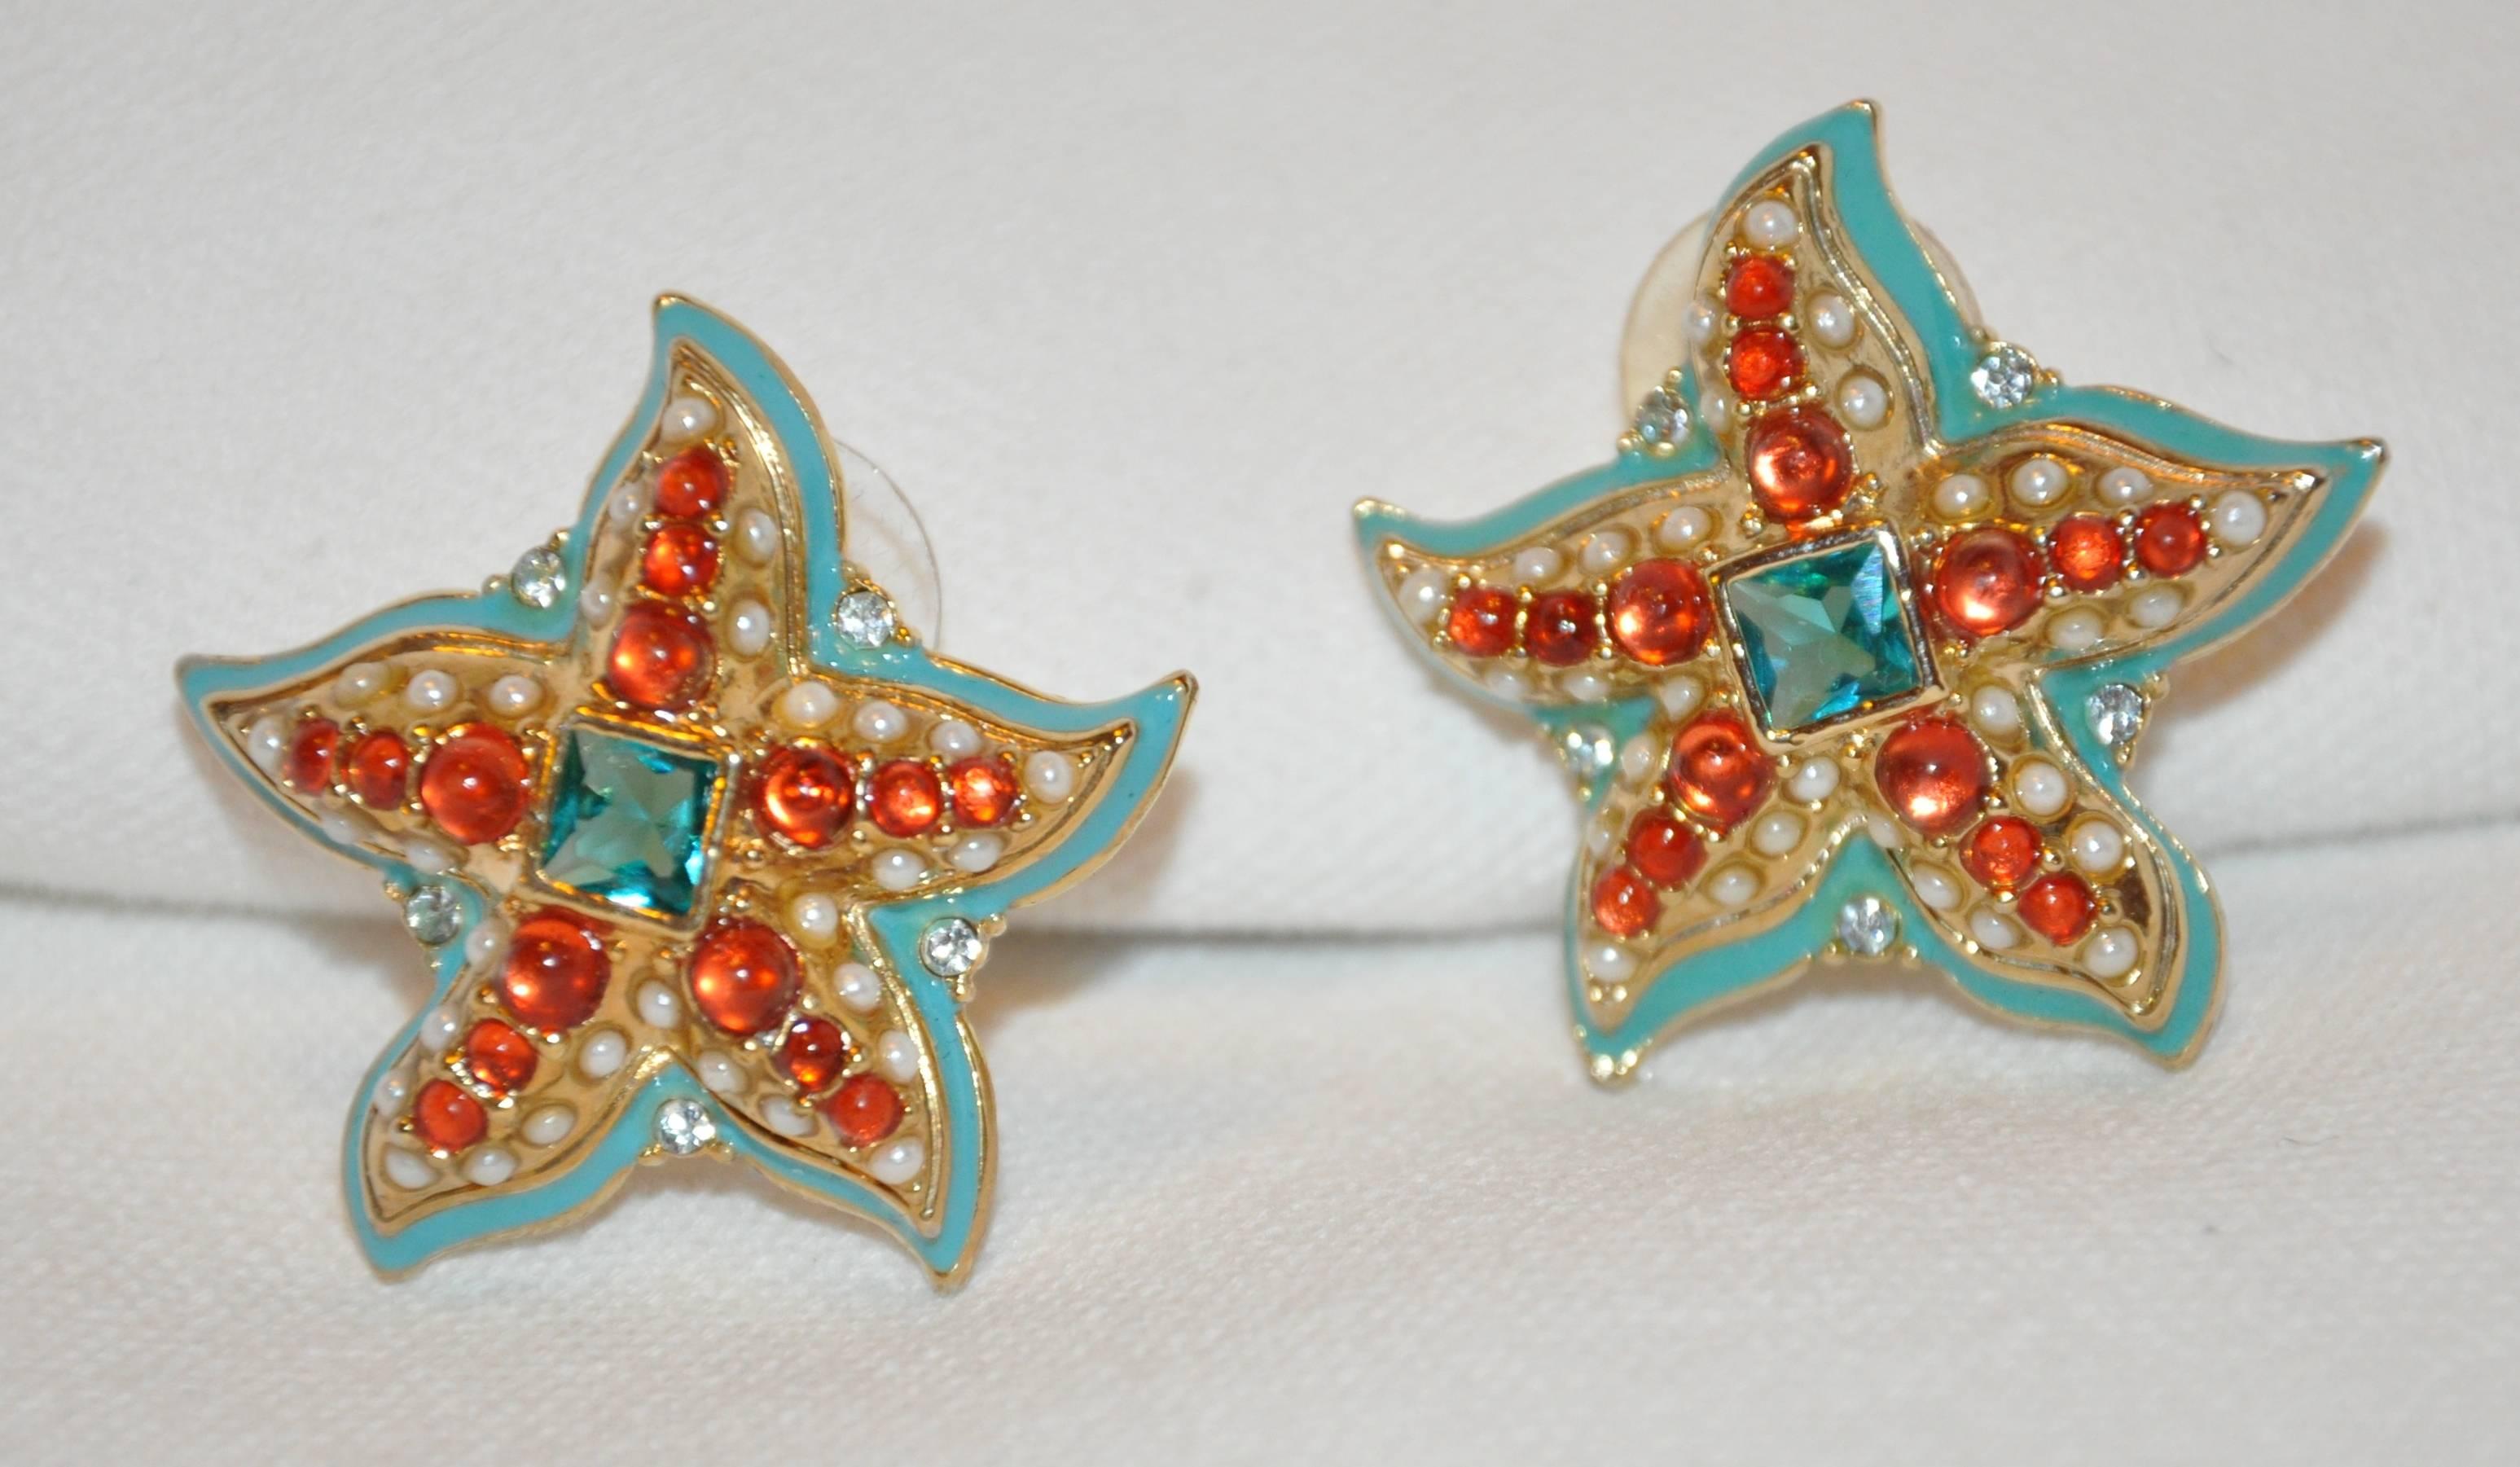         Kenneth Jay Lane wonderfully whimsical multi-color "Starfish" earrings of faux pearls, faux rubies, and faux emerald, surrounded with turquoise-hue enamel and set in gilded gold hardware. These earrings measures 1 1/4" x 1